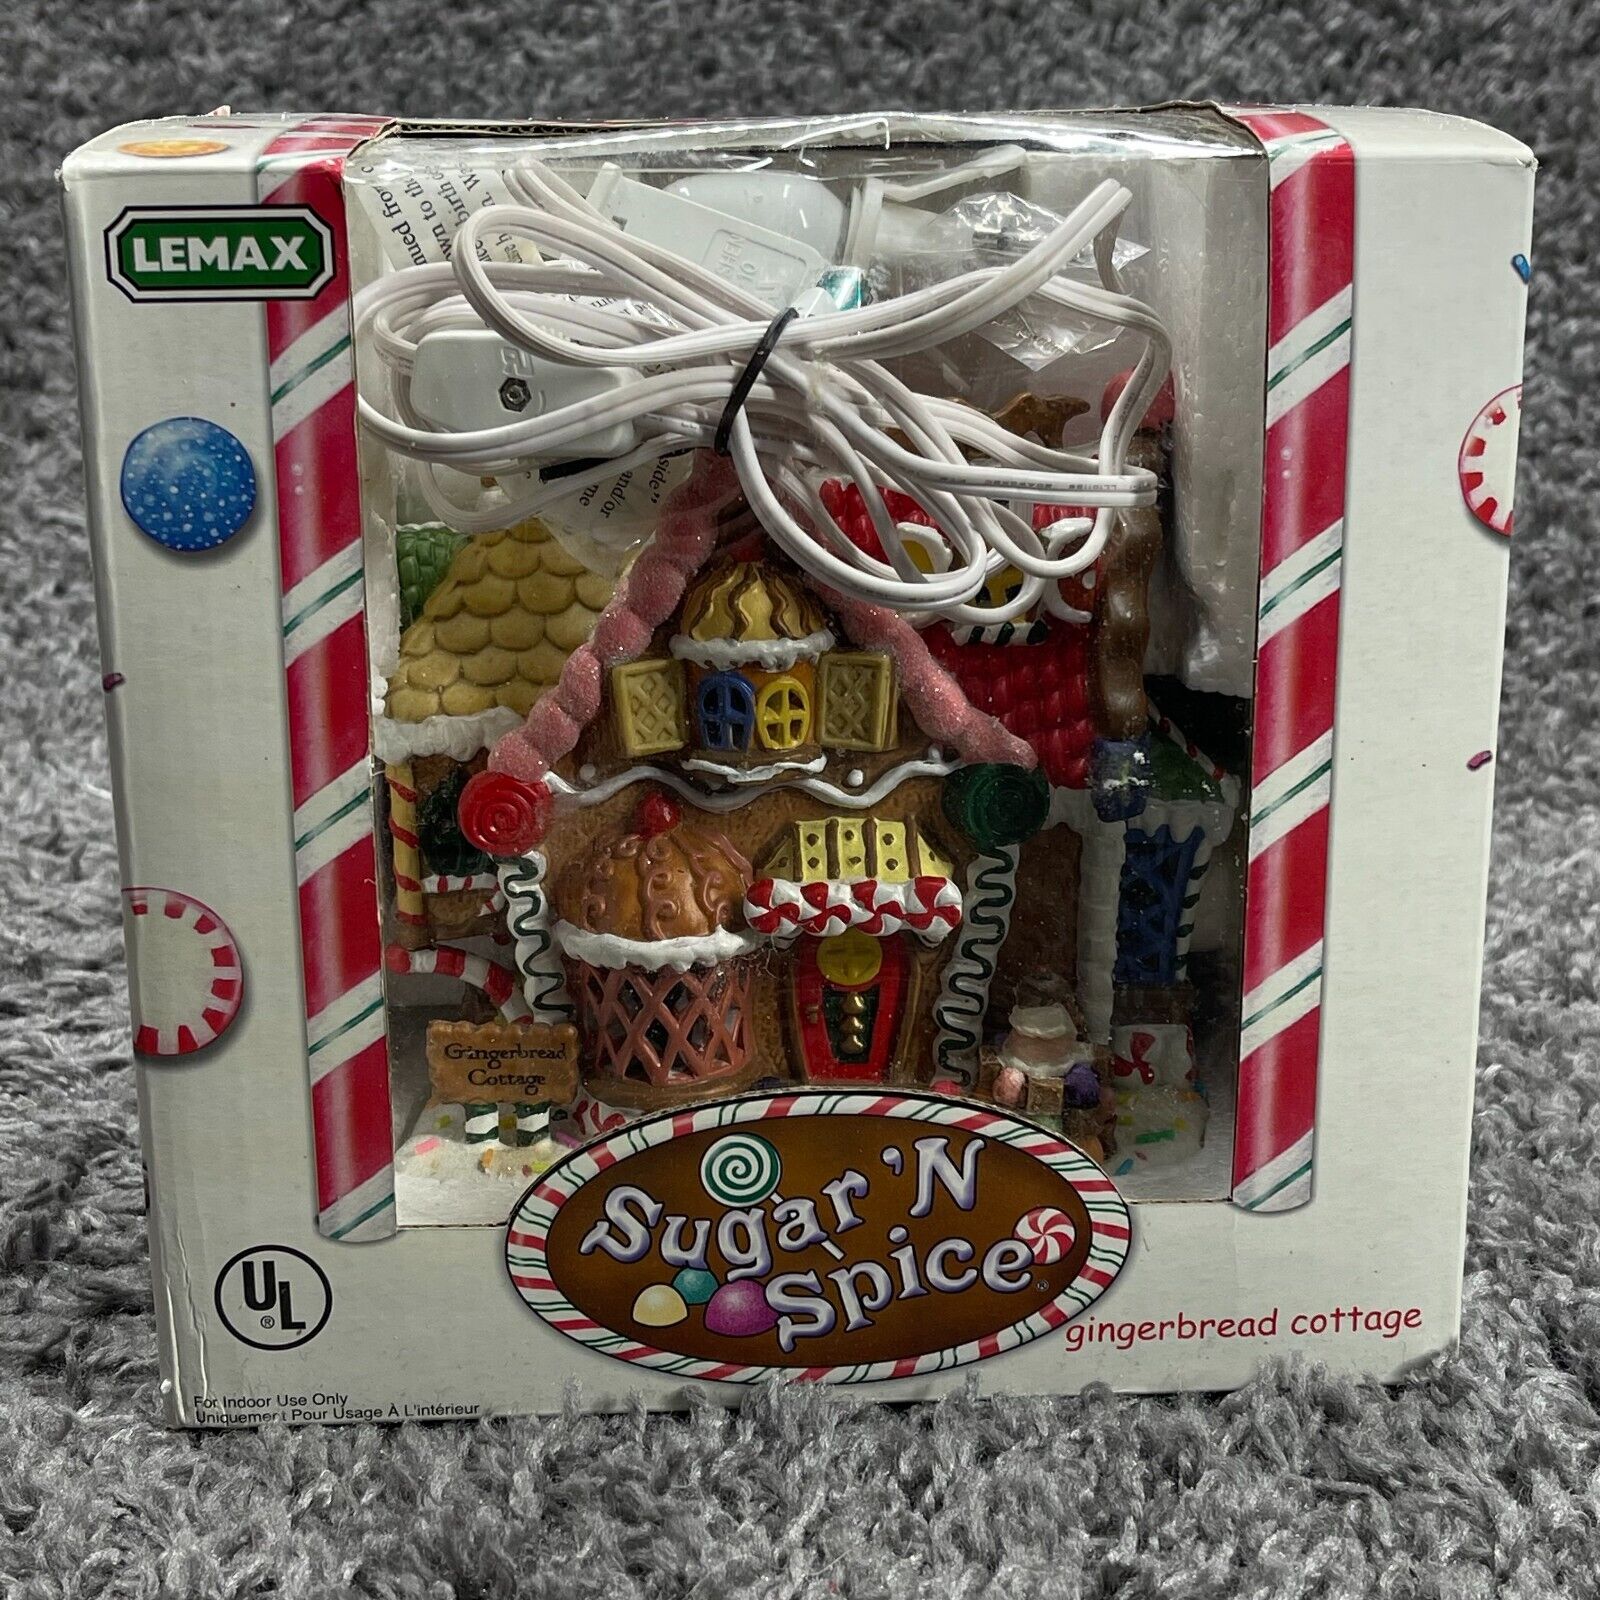 2004 Lemax Sugar N Spice Christmas Porcelain Gingerbread Cottage - New in Box